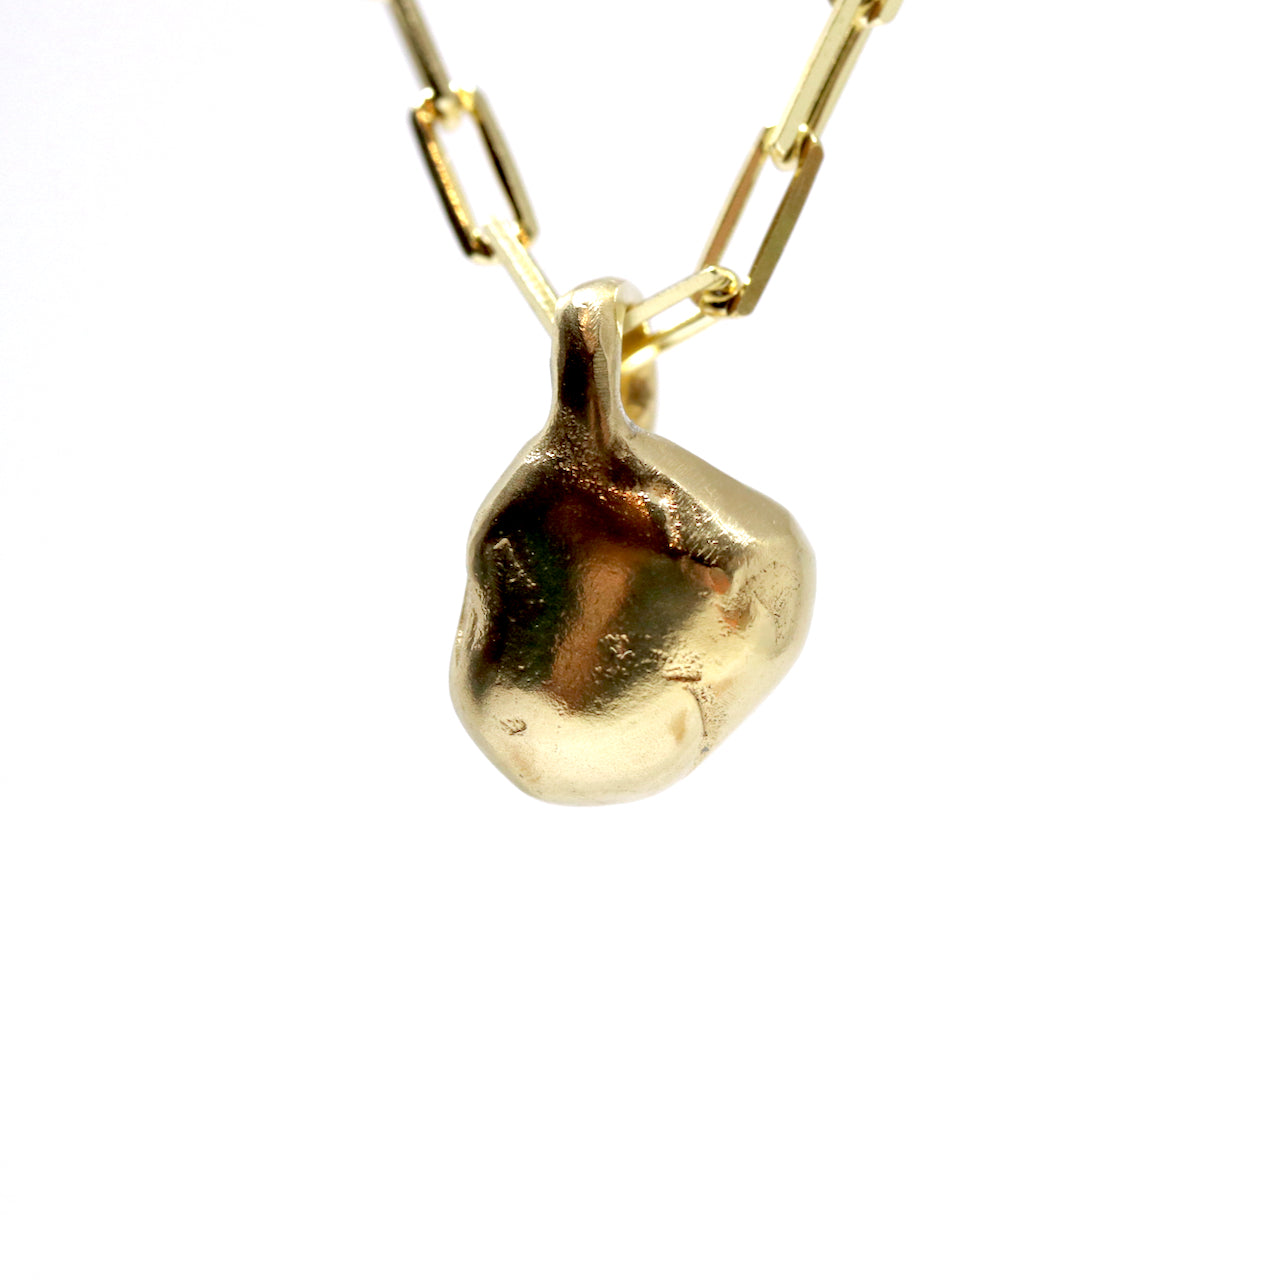 Gold Nugget Necklace. Made by Fruit Bowl Studio Wānaka